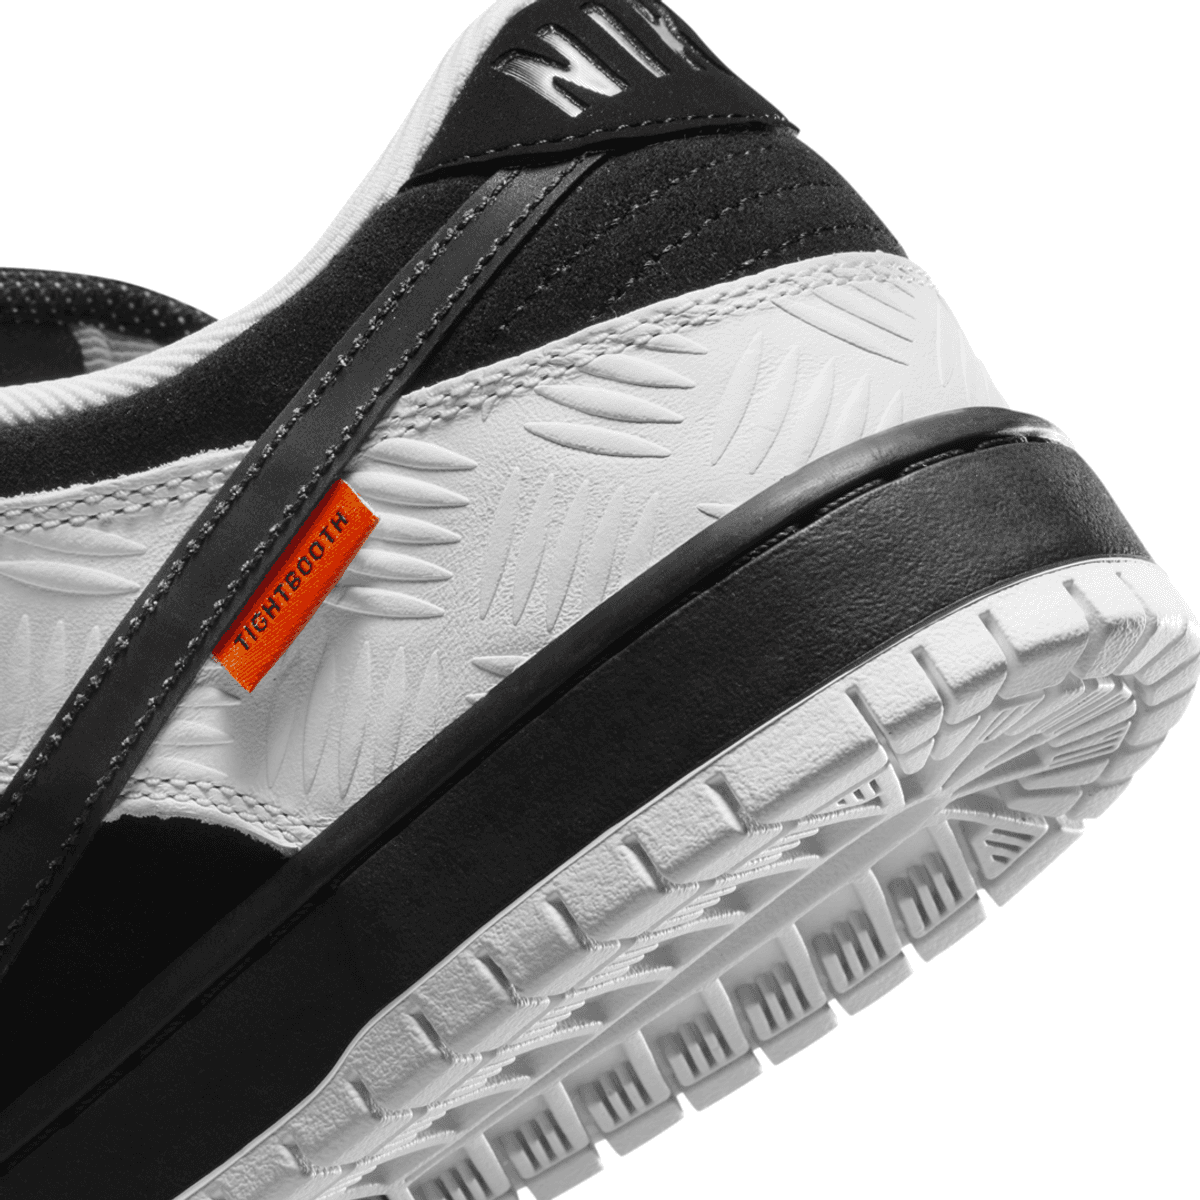 Official Images of the TIGHTBOOTH x Nike SB Dunk Low